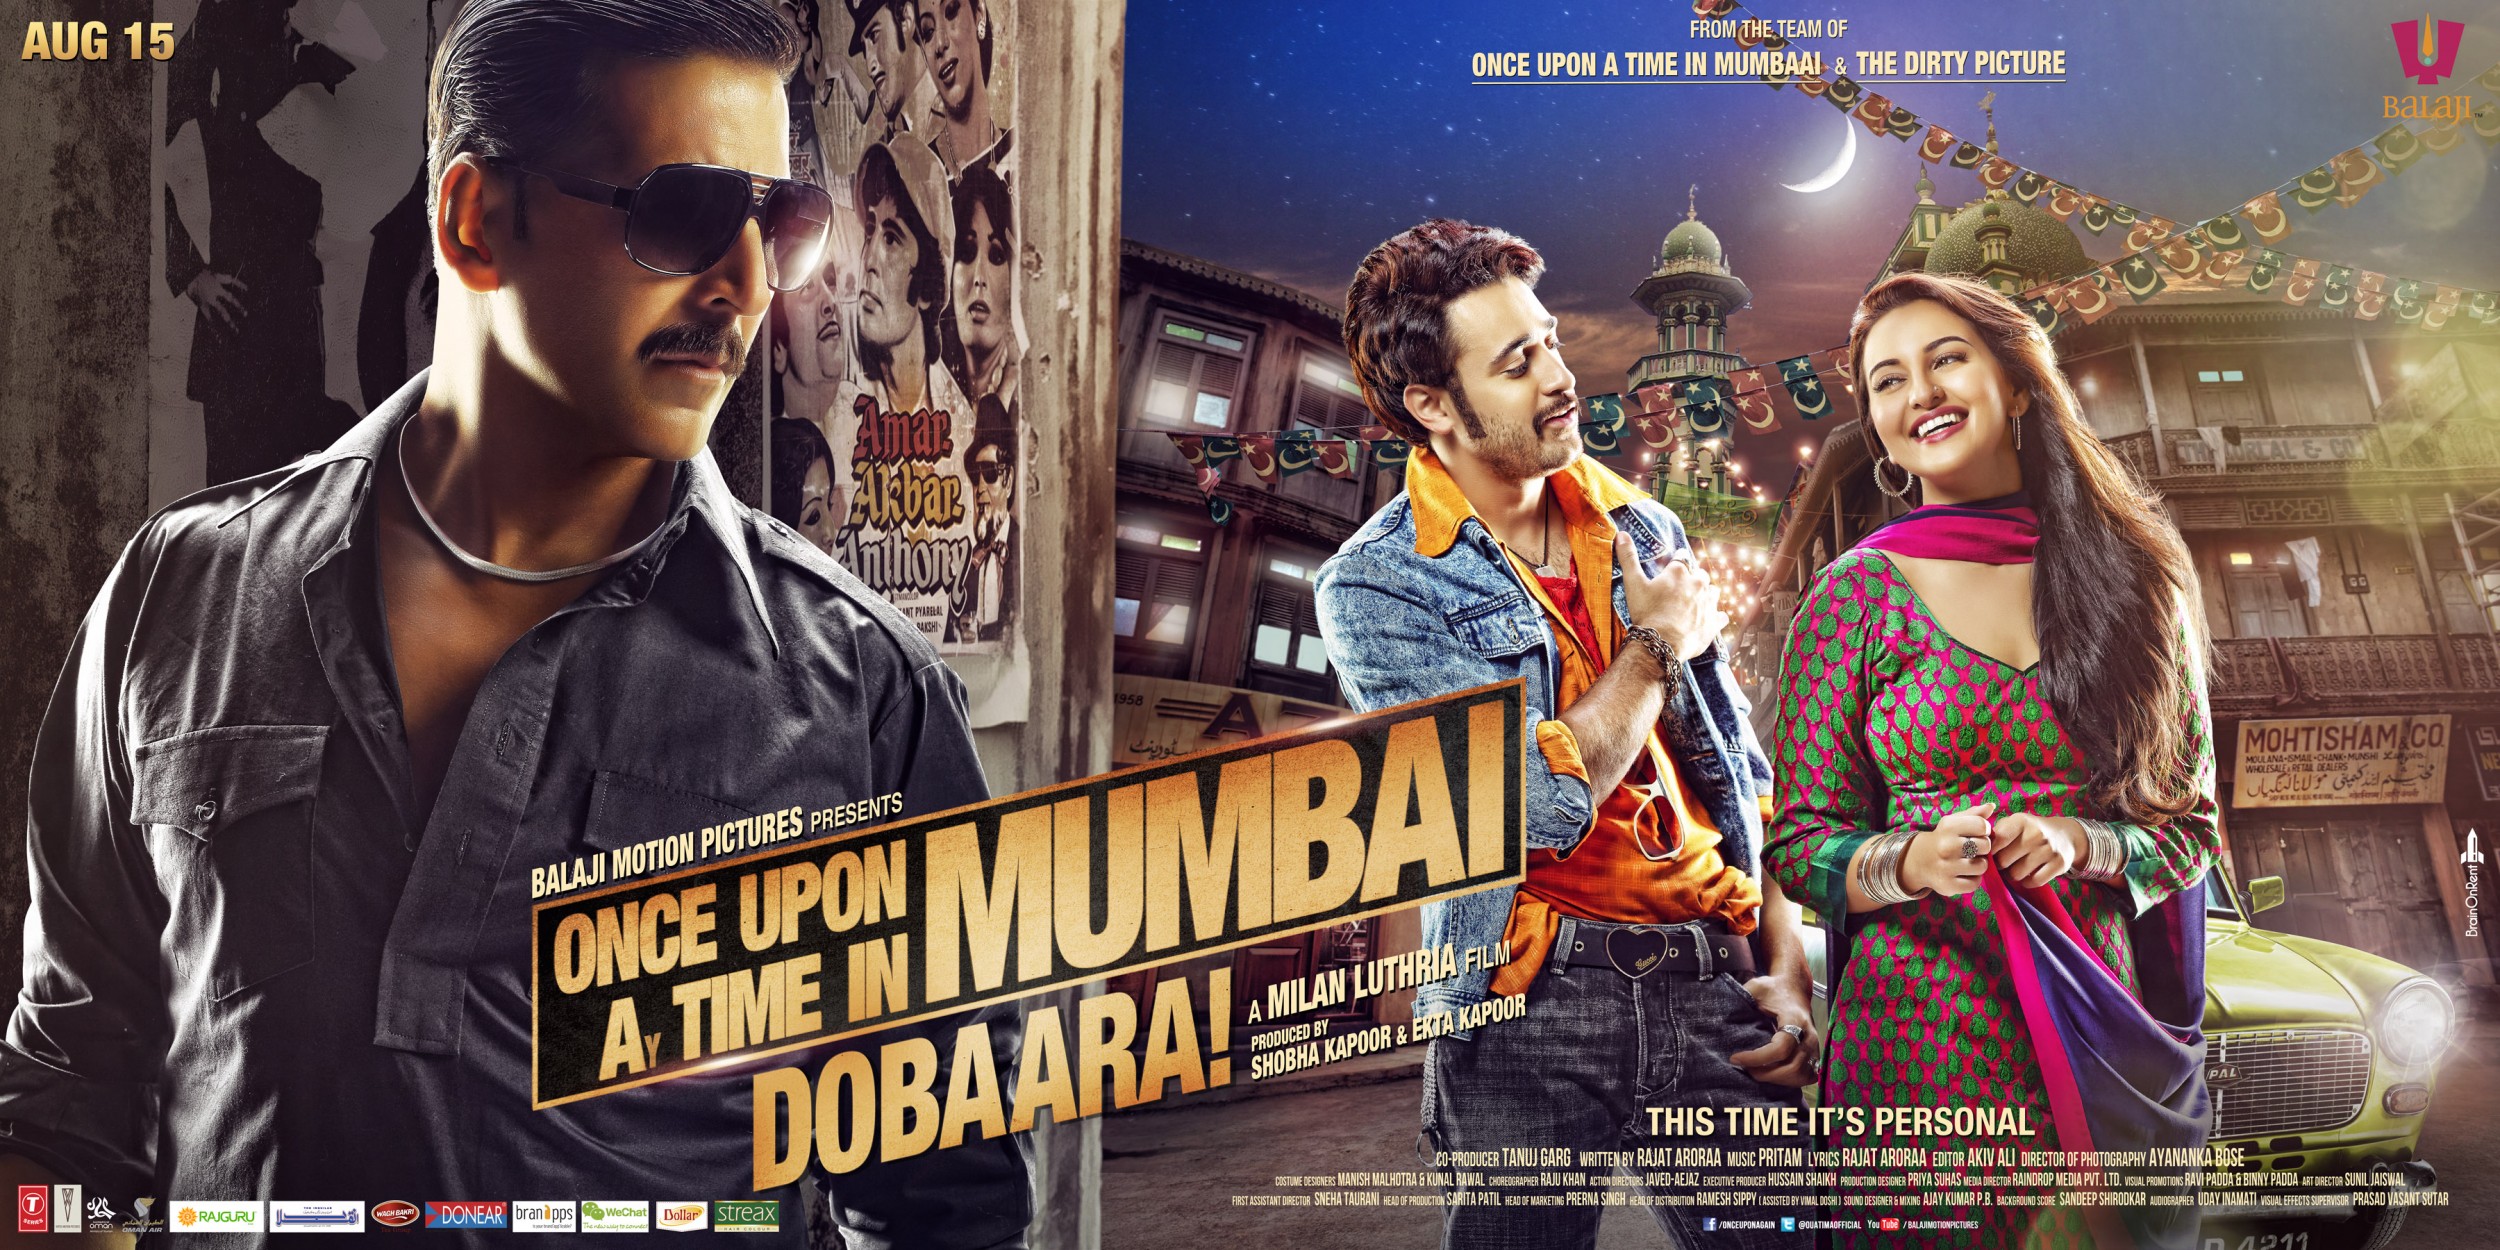 Mega Sized Movie Poster Image for Once Upon a Time in Mumbai Dobaara! (#6 of 11)